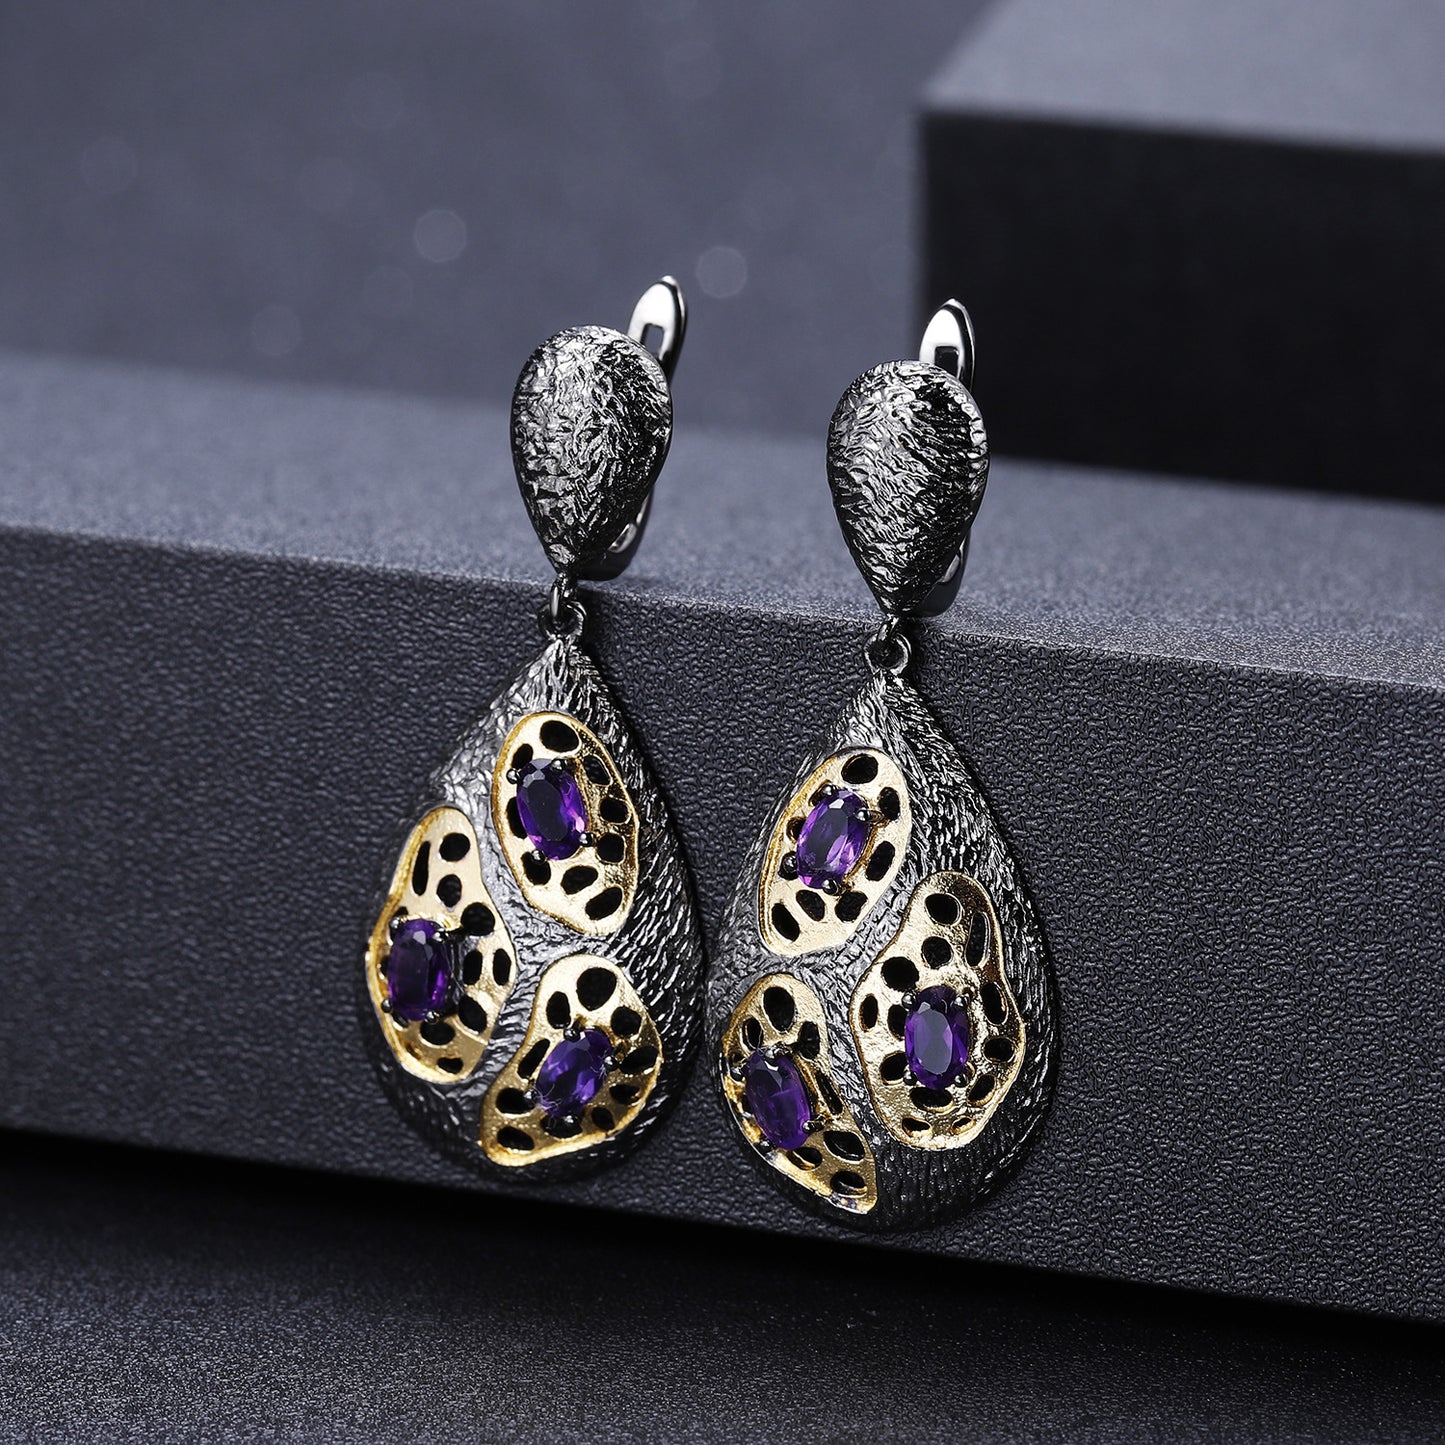 Italian Antique Style Inlaid Natural Colourful Gemstones Pear Drop Silver Earrings for Women